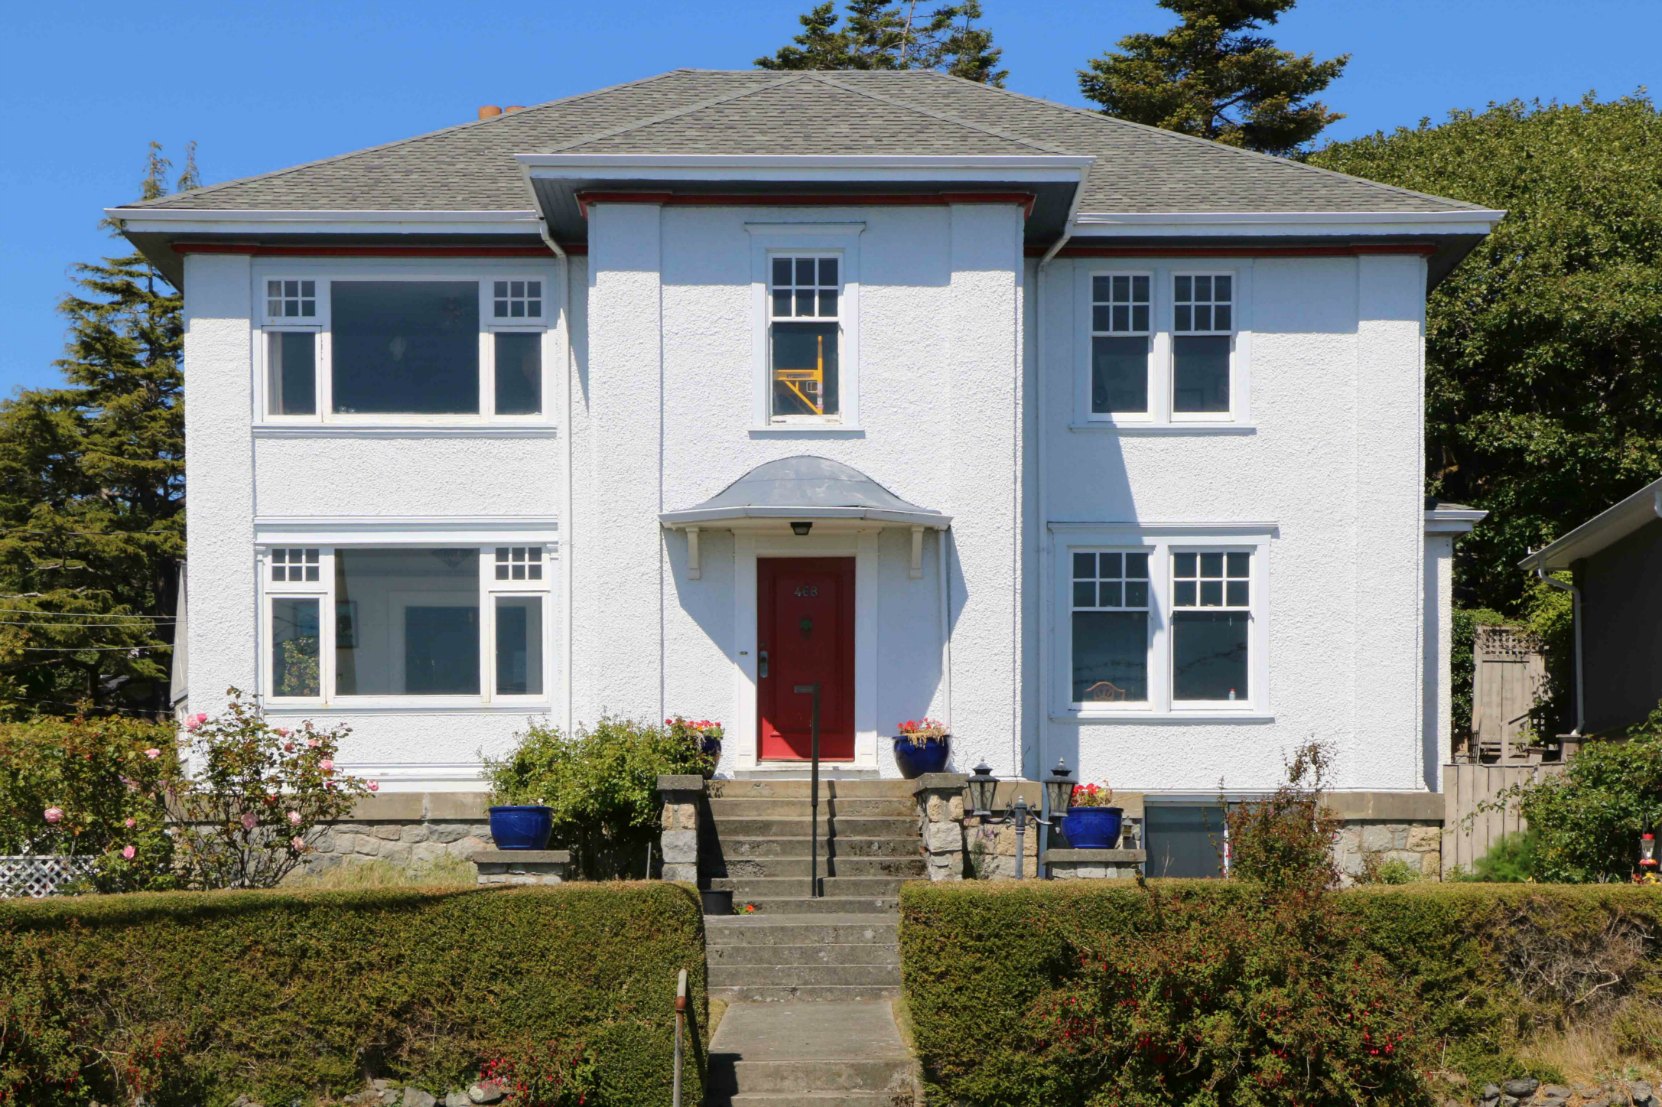 468 Beach Drive, built in 1920 by architect Samuel Maclure for Ernest Halsall